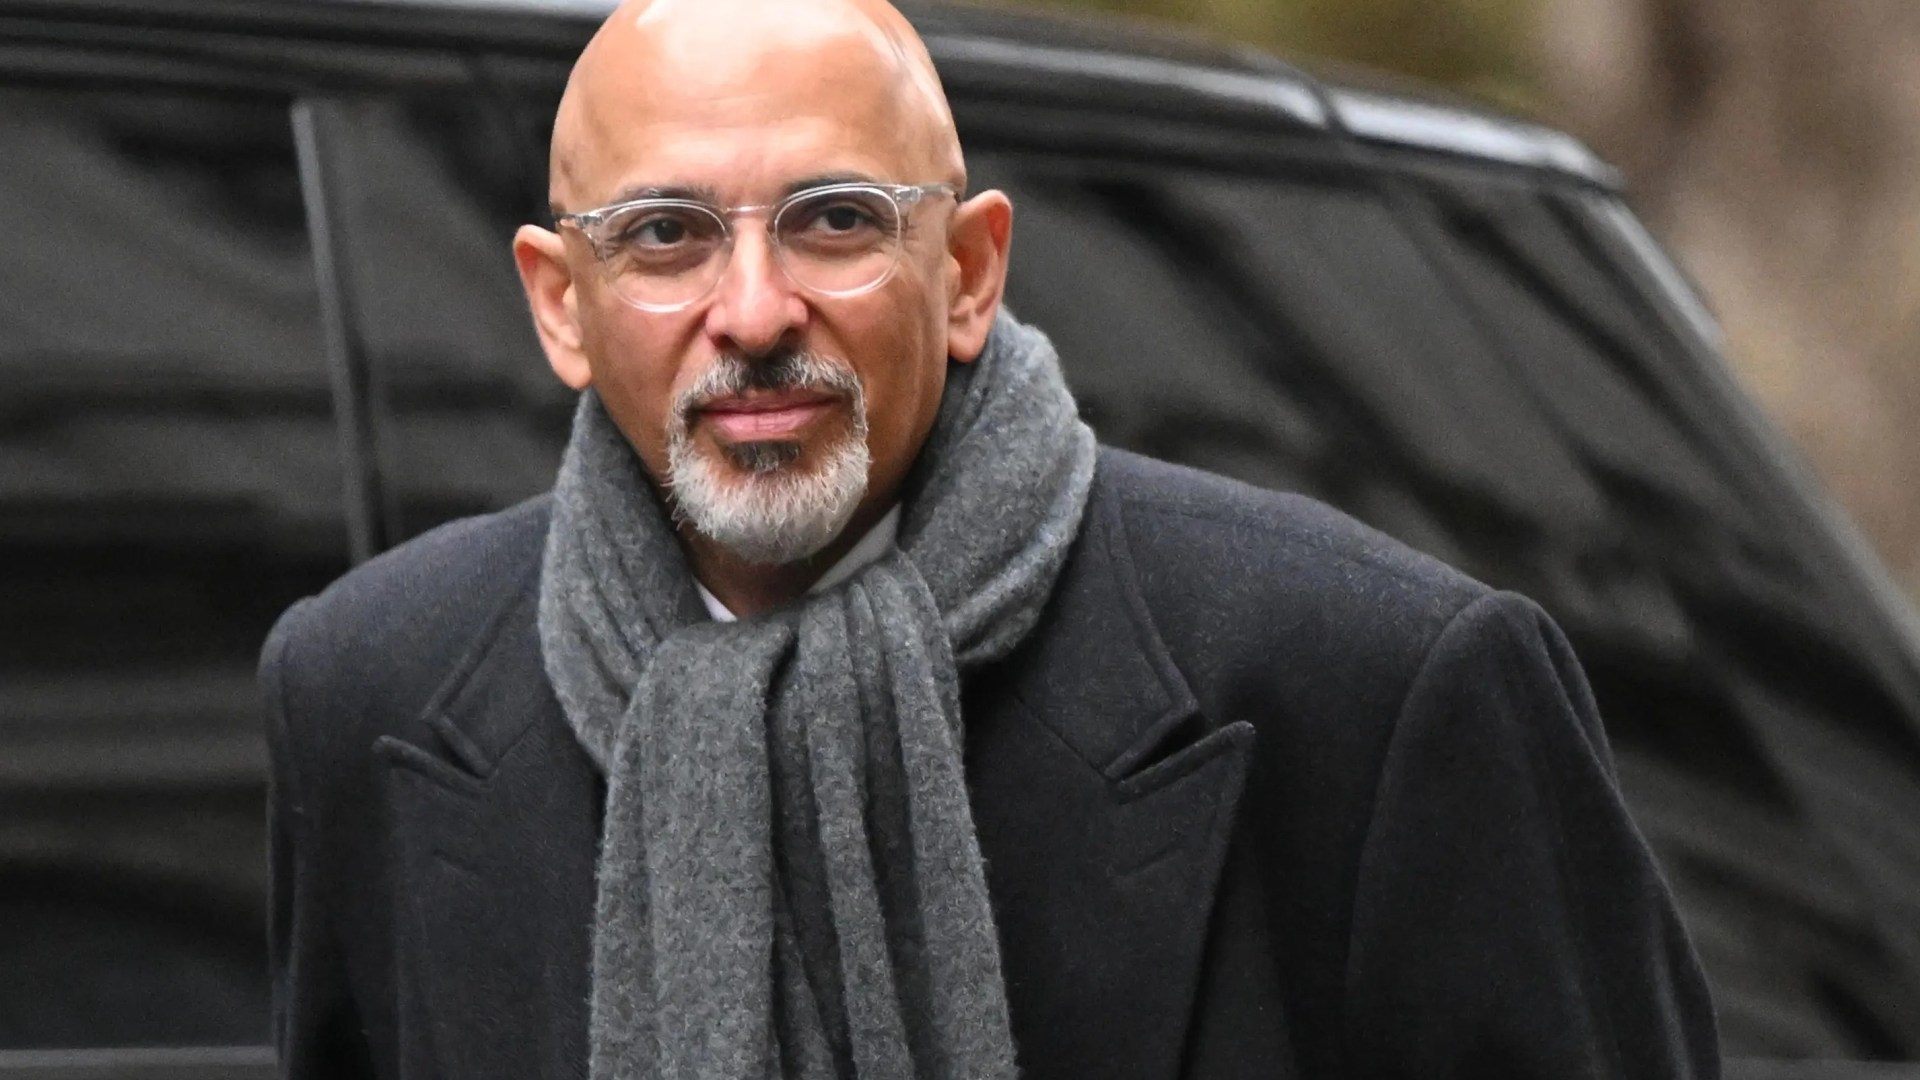 Nadhim Zahawi announces he will quit as an MP as ex-Chancellor says ‘my mistakes have been mine’ [Video]